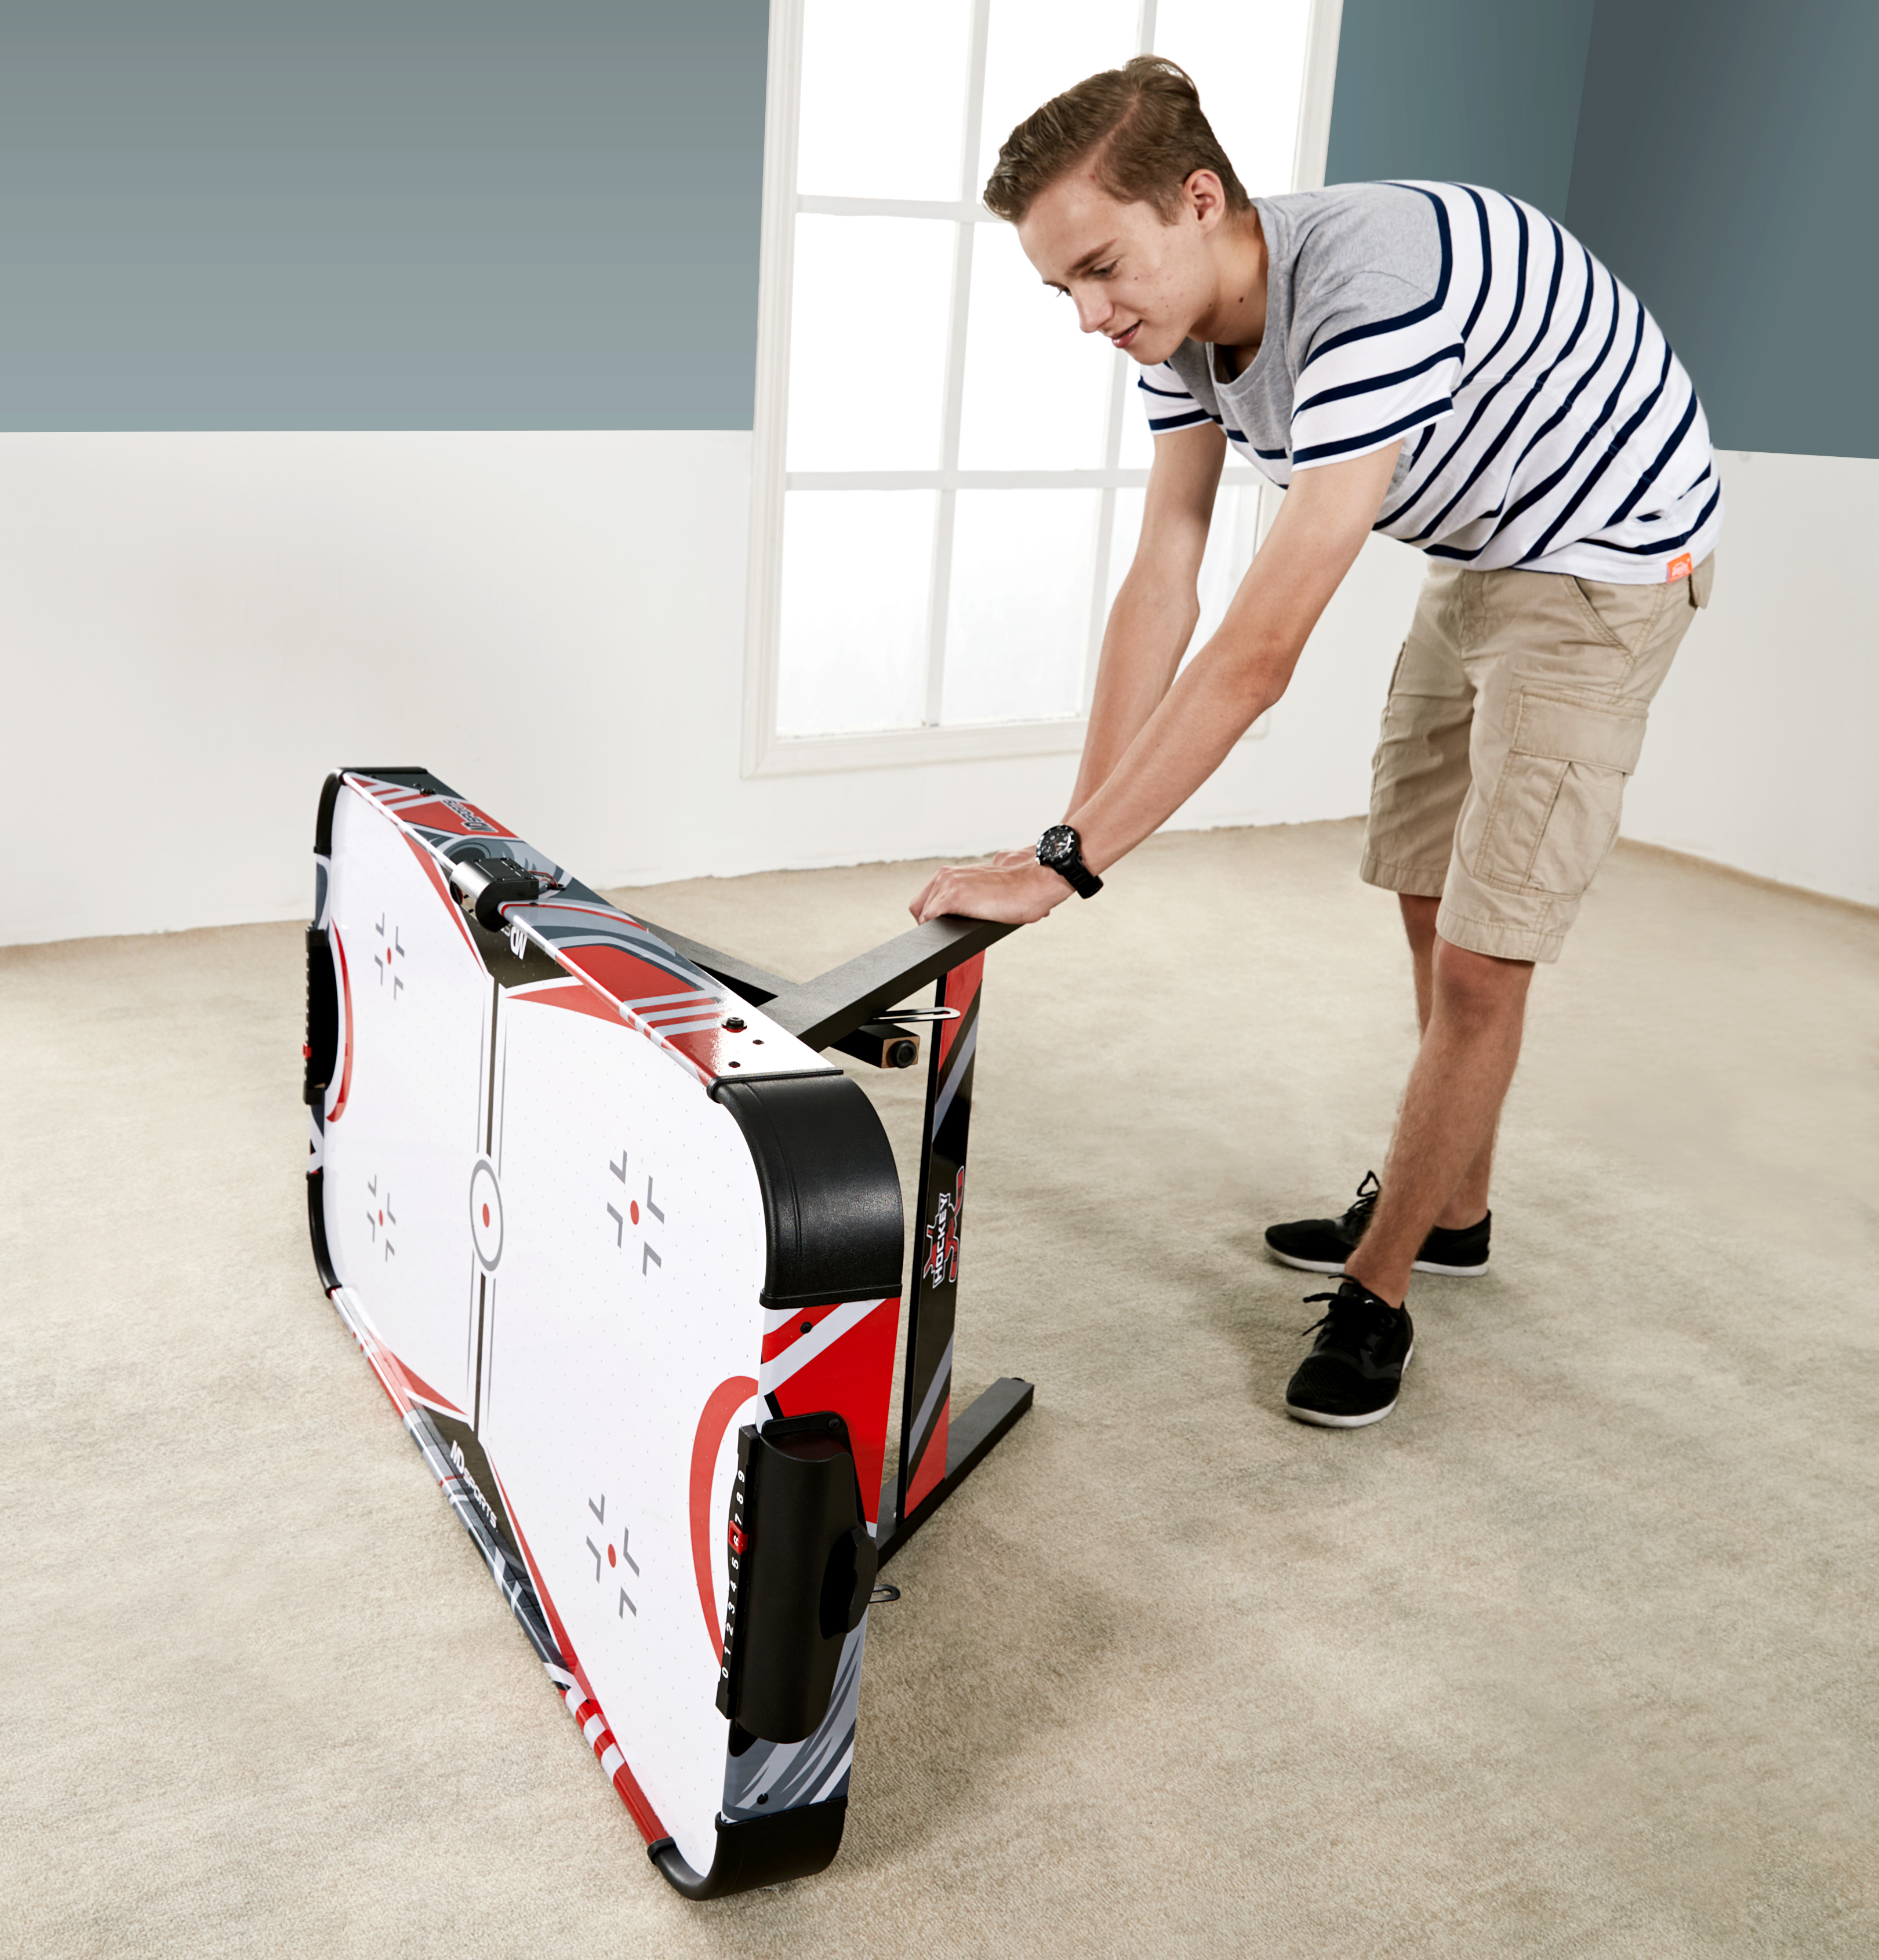 MD Sports Easy Assembly 48" Air Powered Hockey Table, Compact Storage/Foldable Legs, Red/Black - image 2 of 13